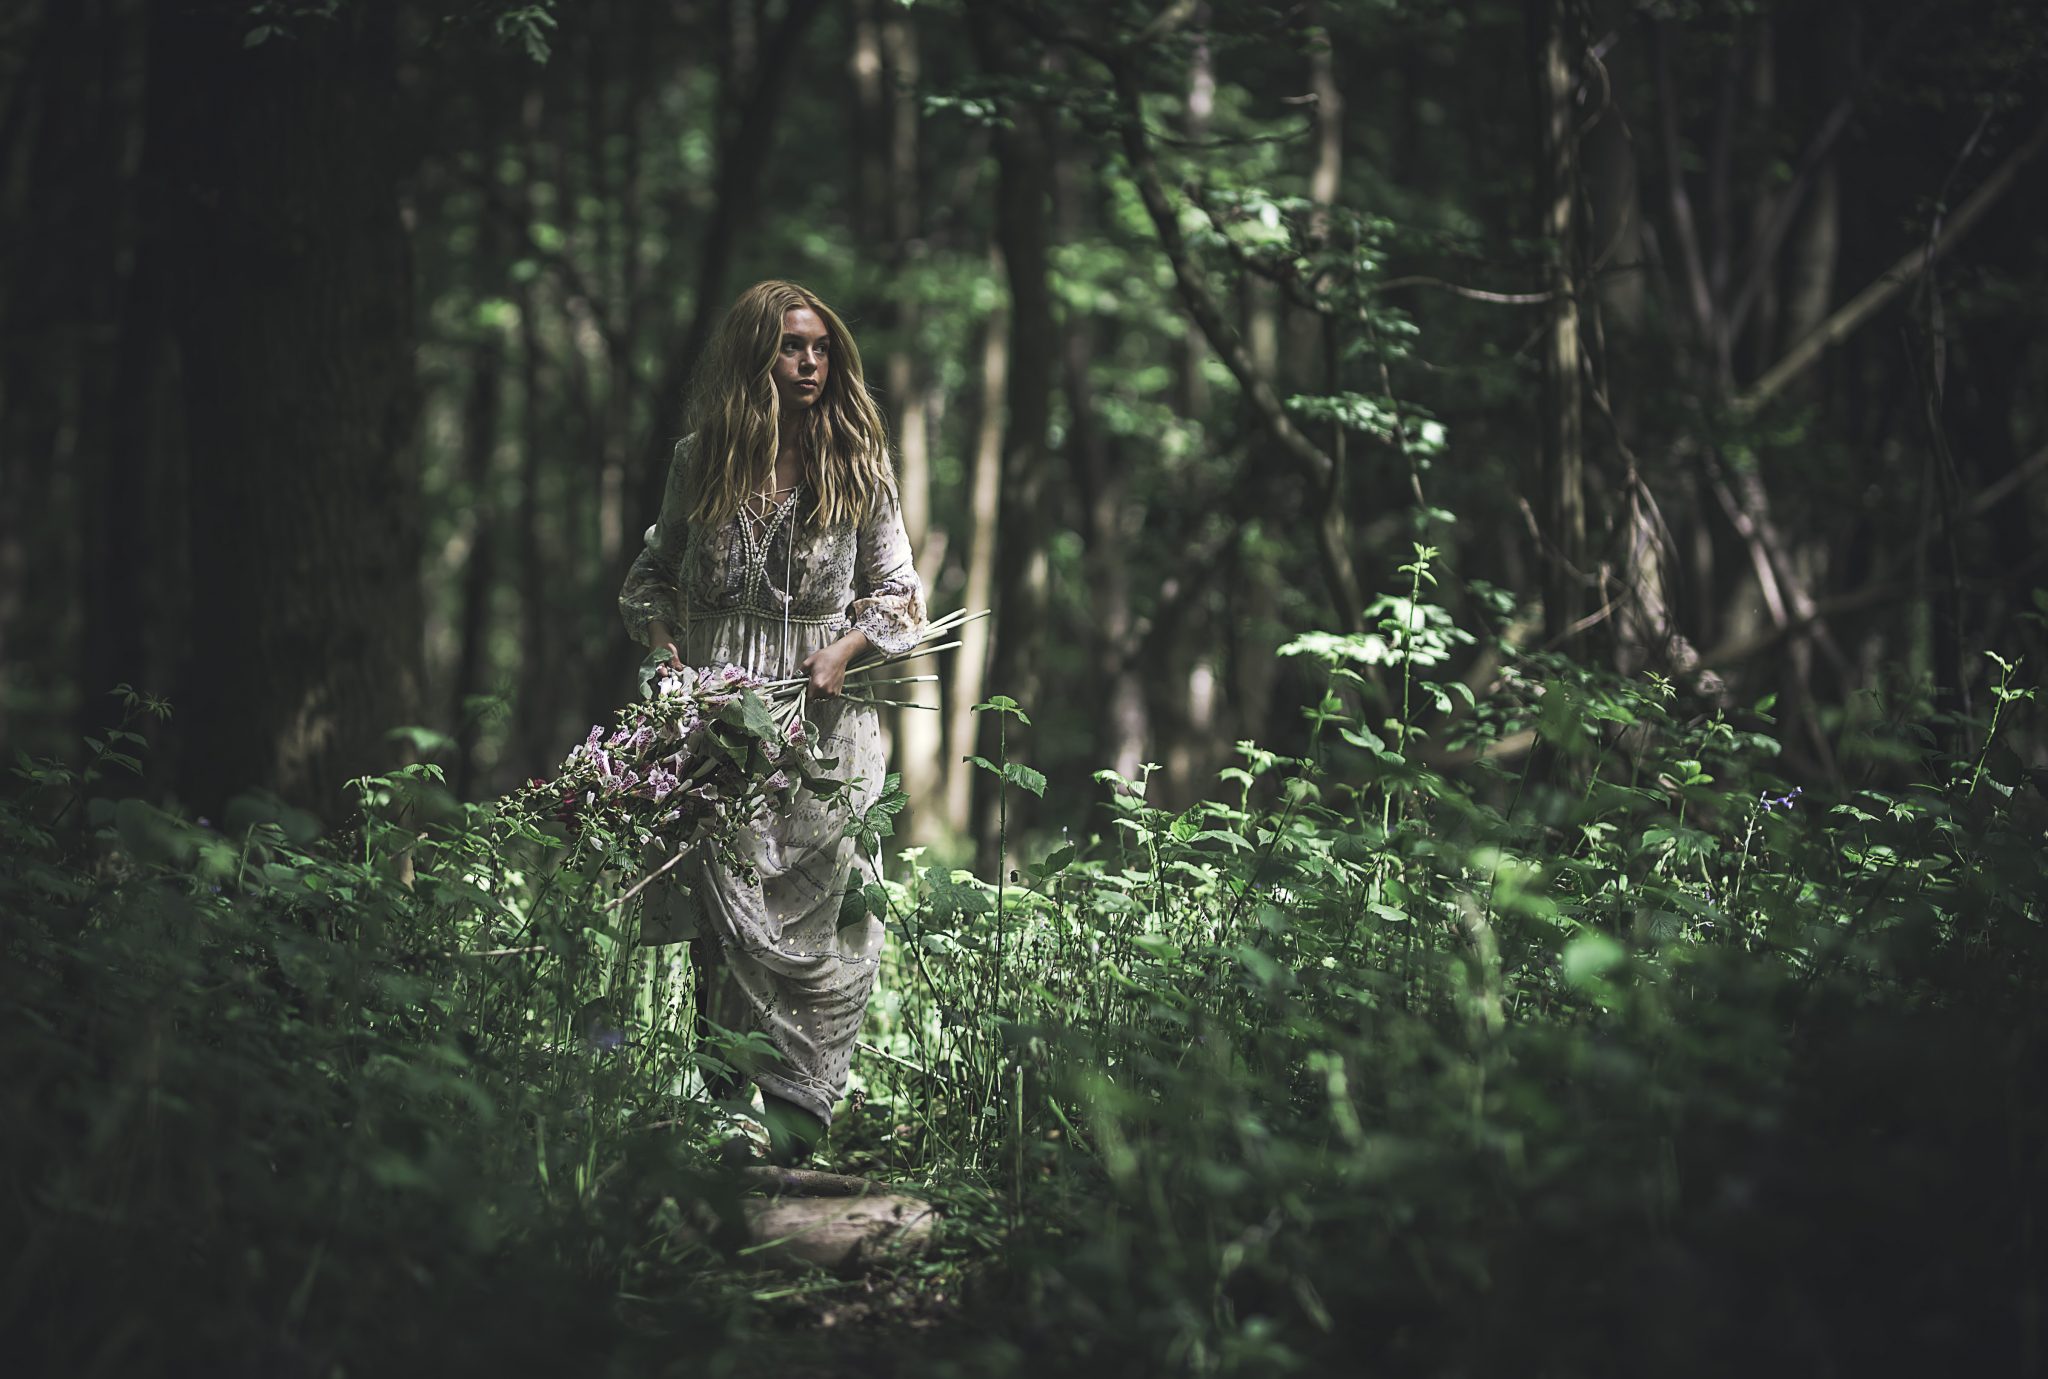 In the woods at the Dreys woodland wedding venue